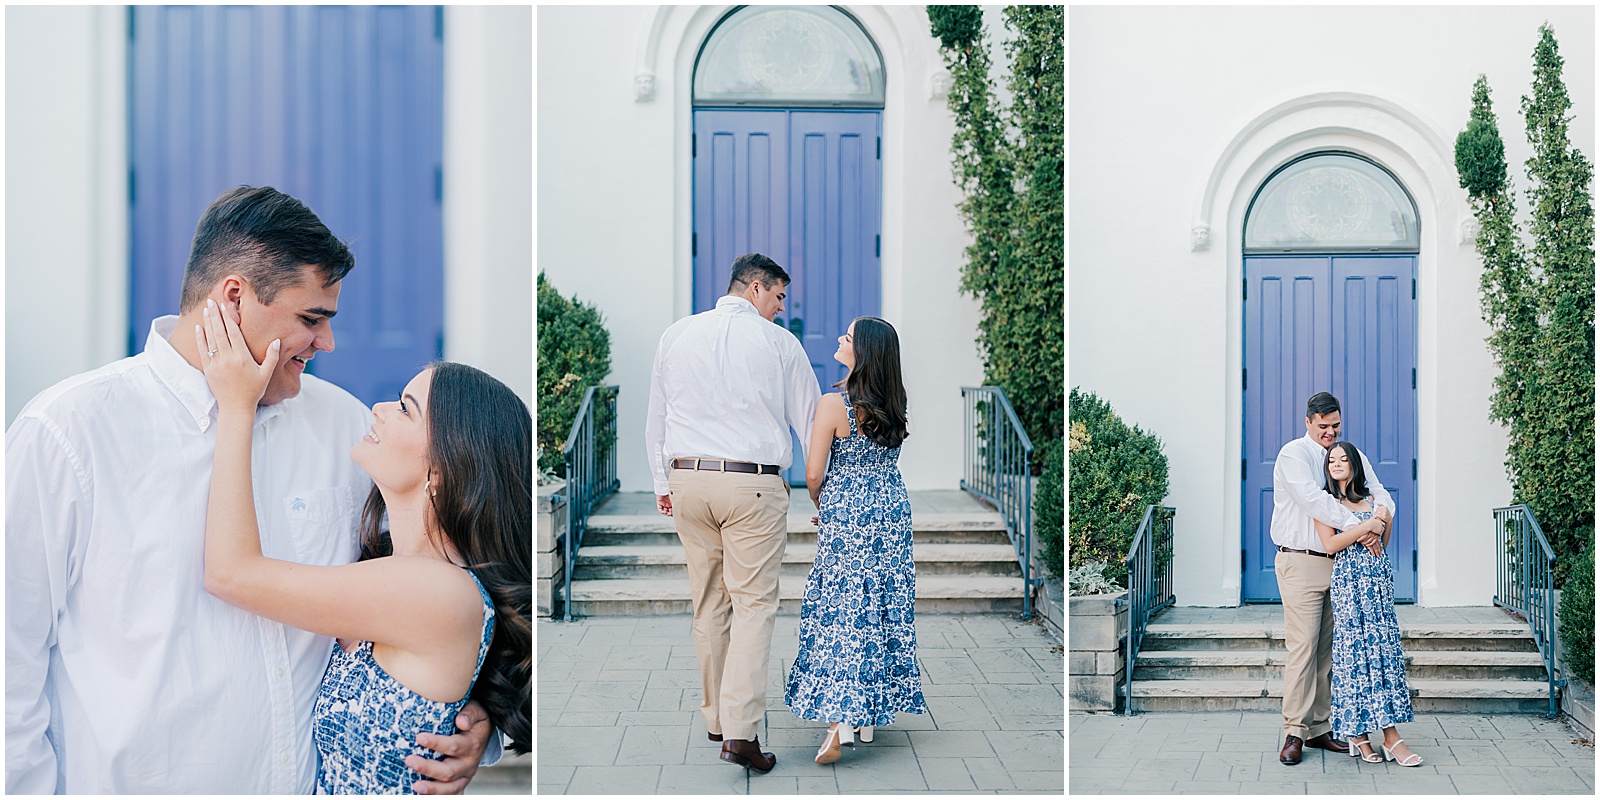 Engagement portraits at the historic First United Methodist Church in Huntsville, Alabama